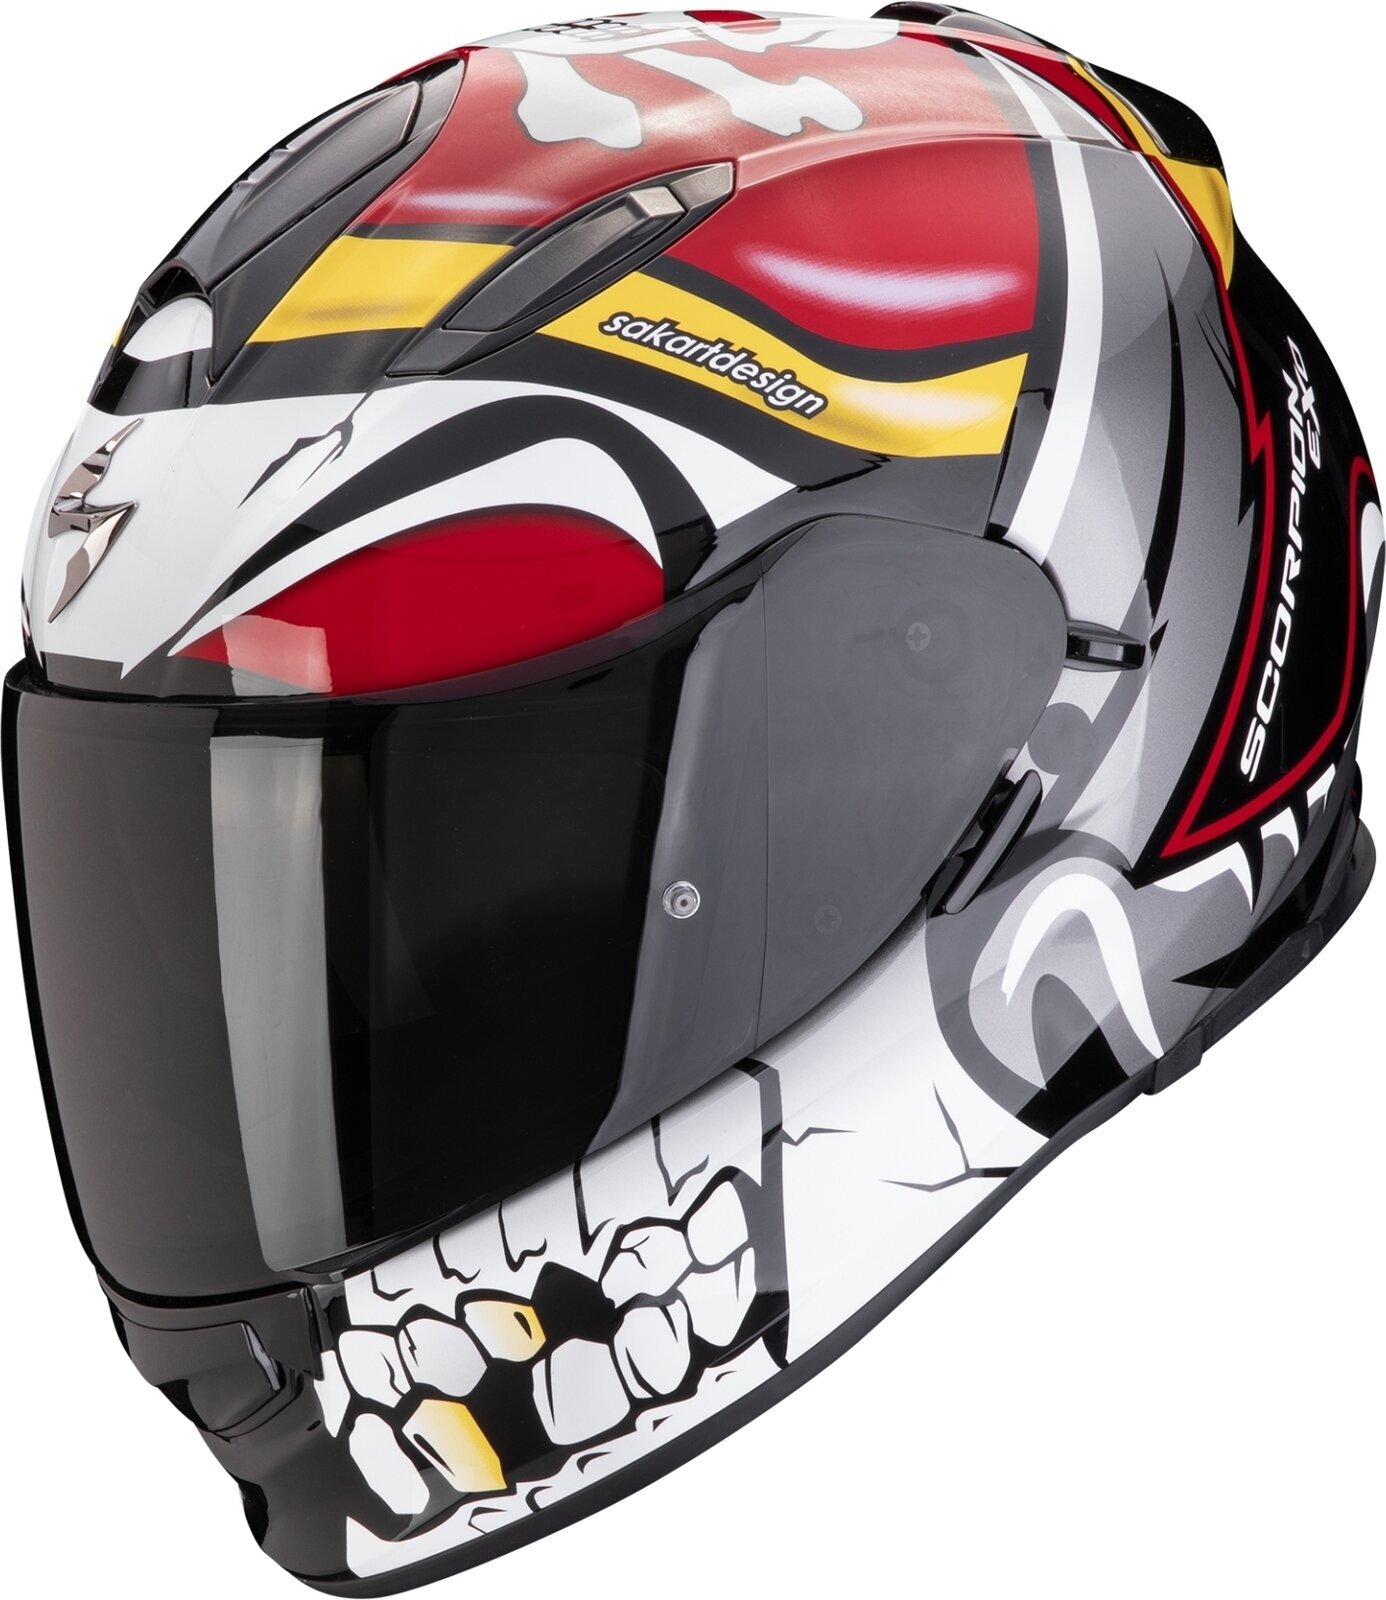 Kask Scorpion EXO 491 PIRATE Red L Kask